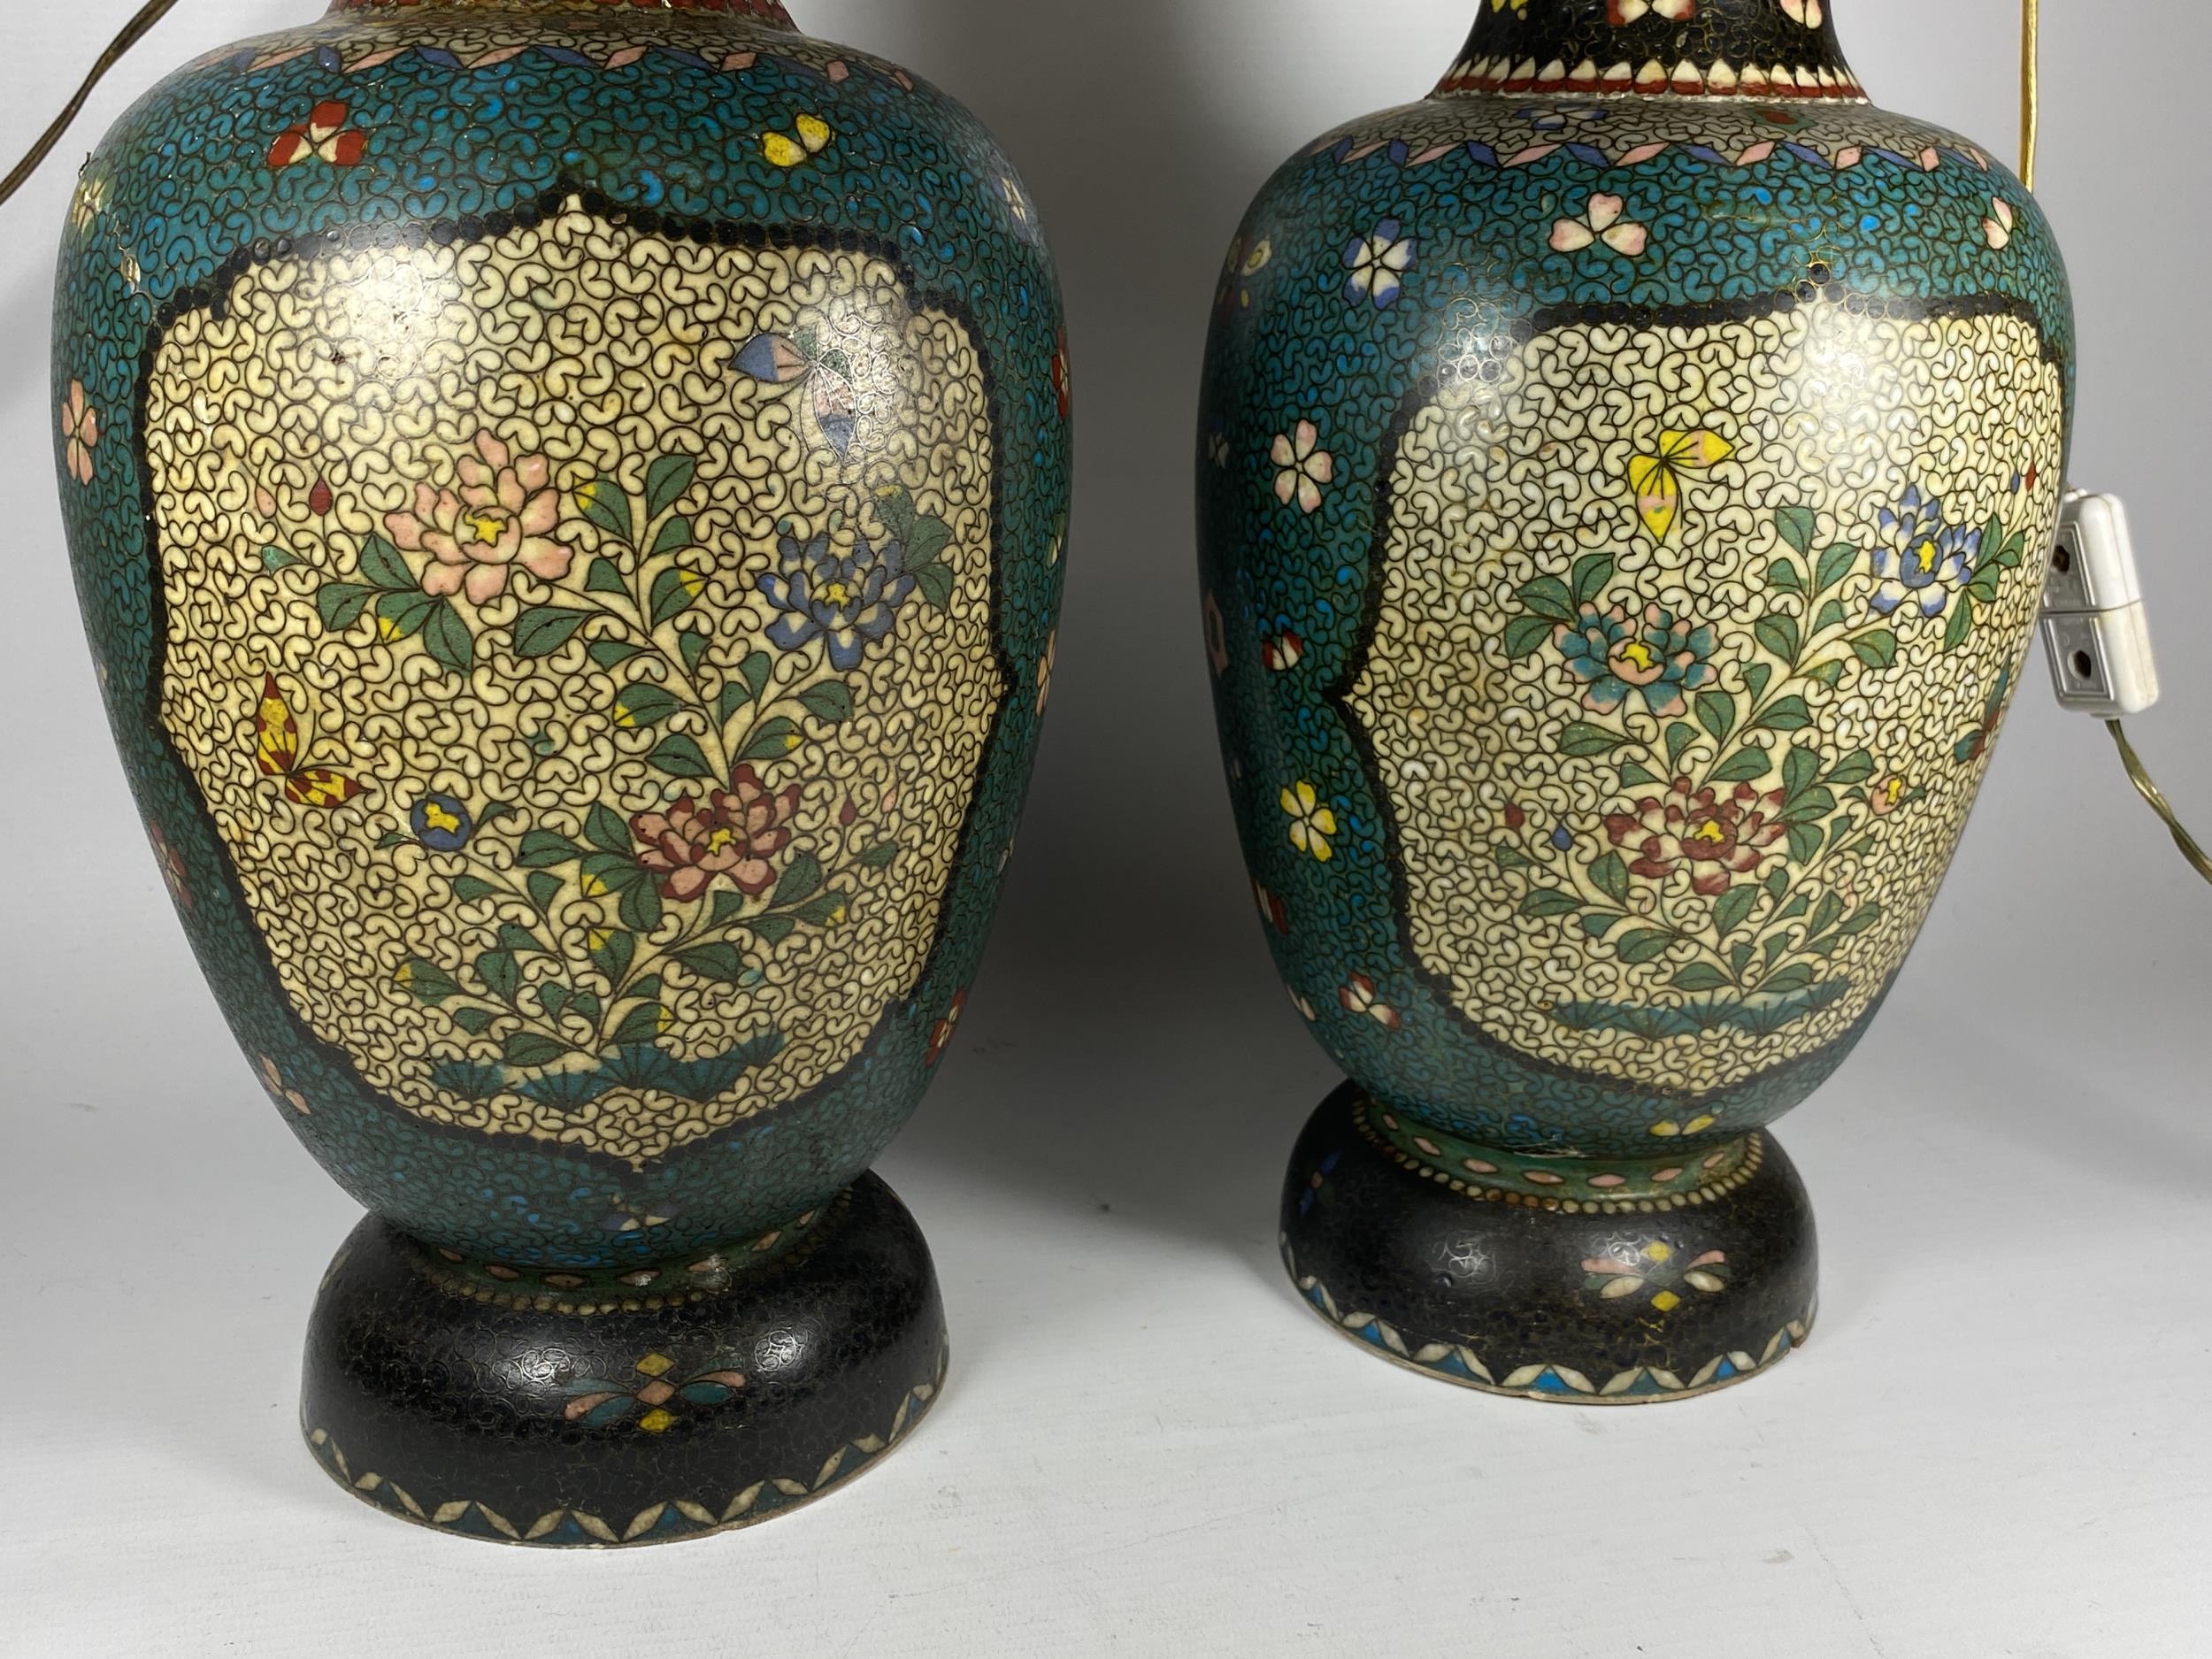 A PAIR OF JAPANESE MEIJI PERIOD (1868-1912) SATSUMA POTTERY CONVERTED LAMP BASES IN THE CLOISONNE - Image 3 of 6